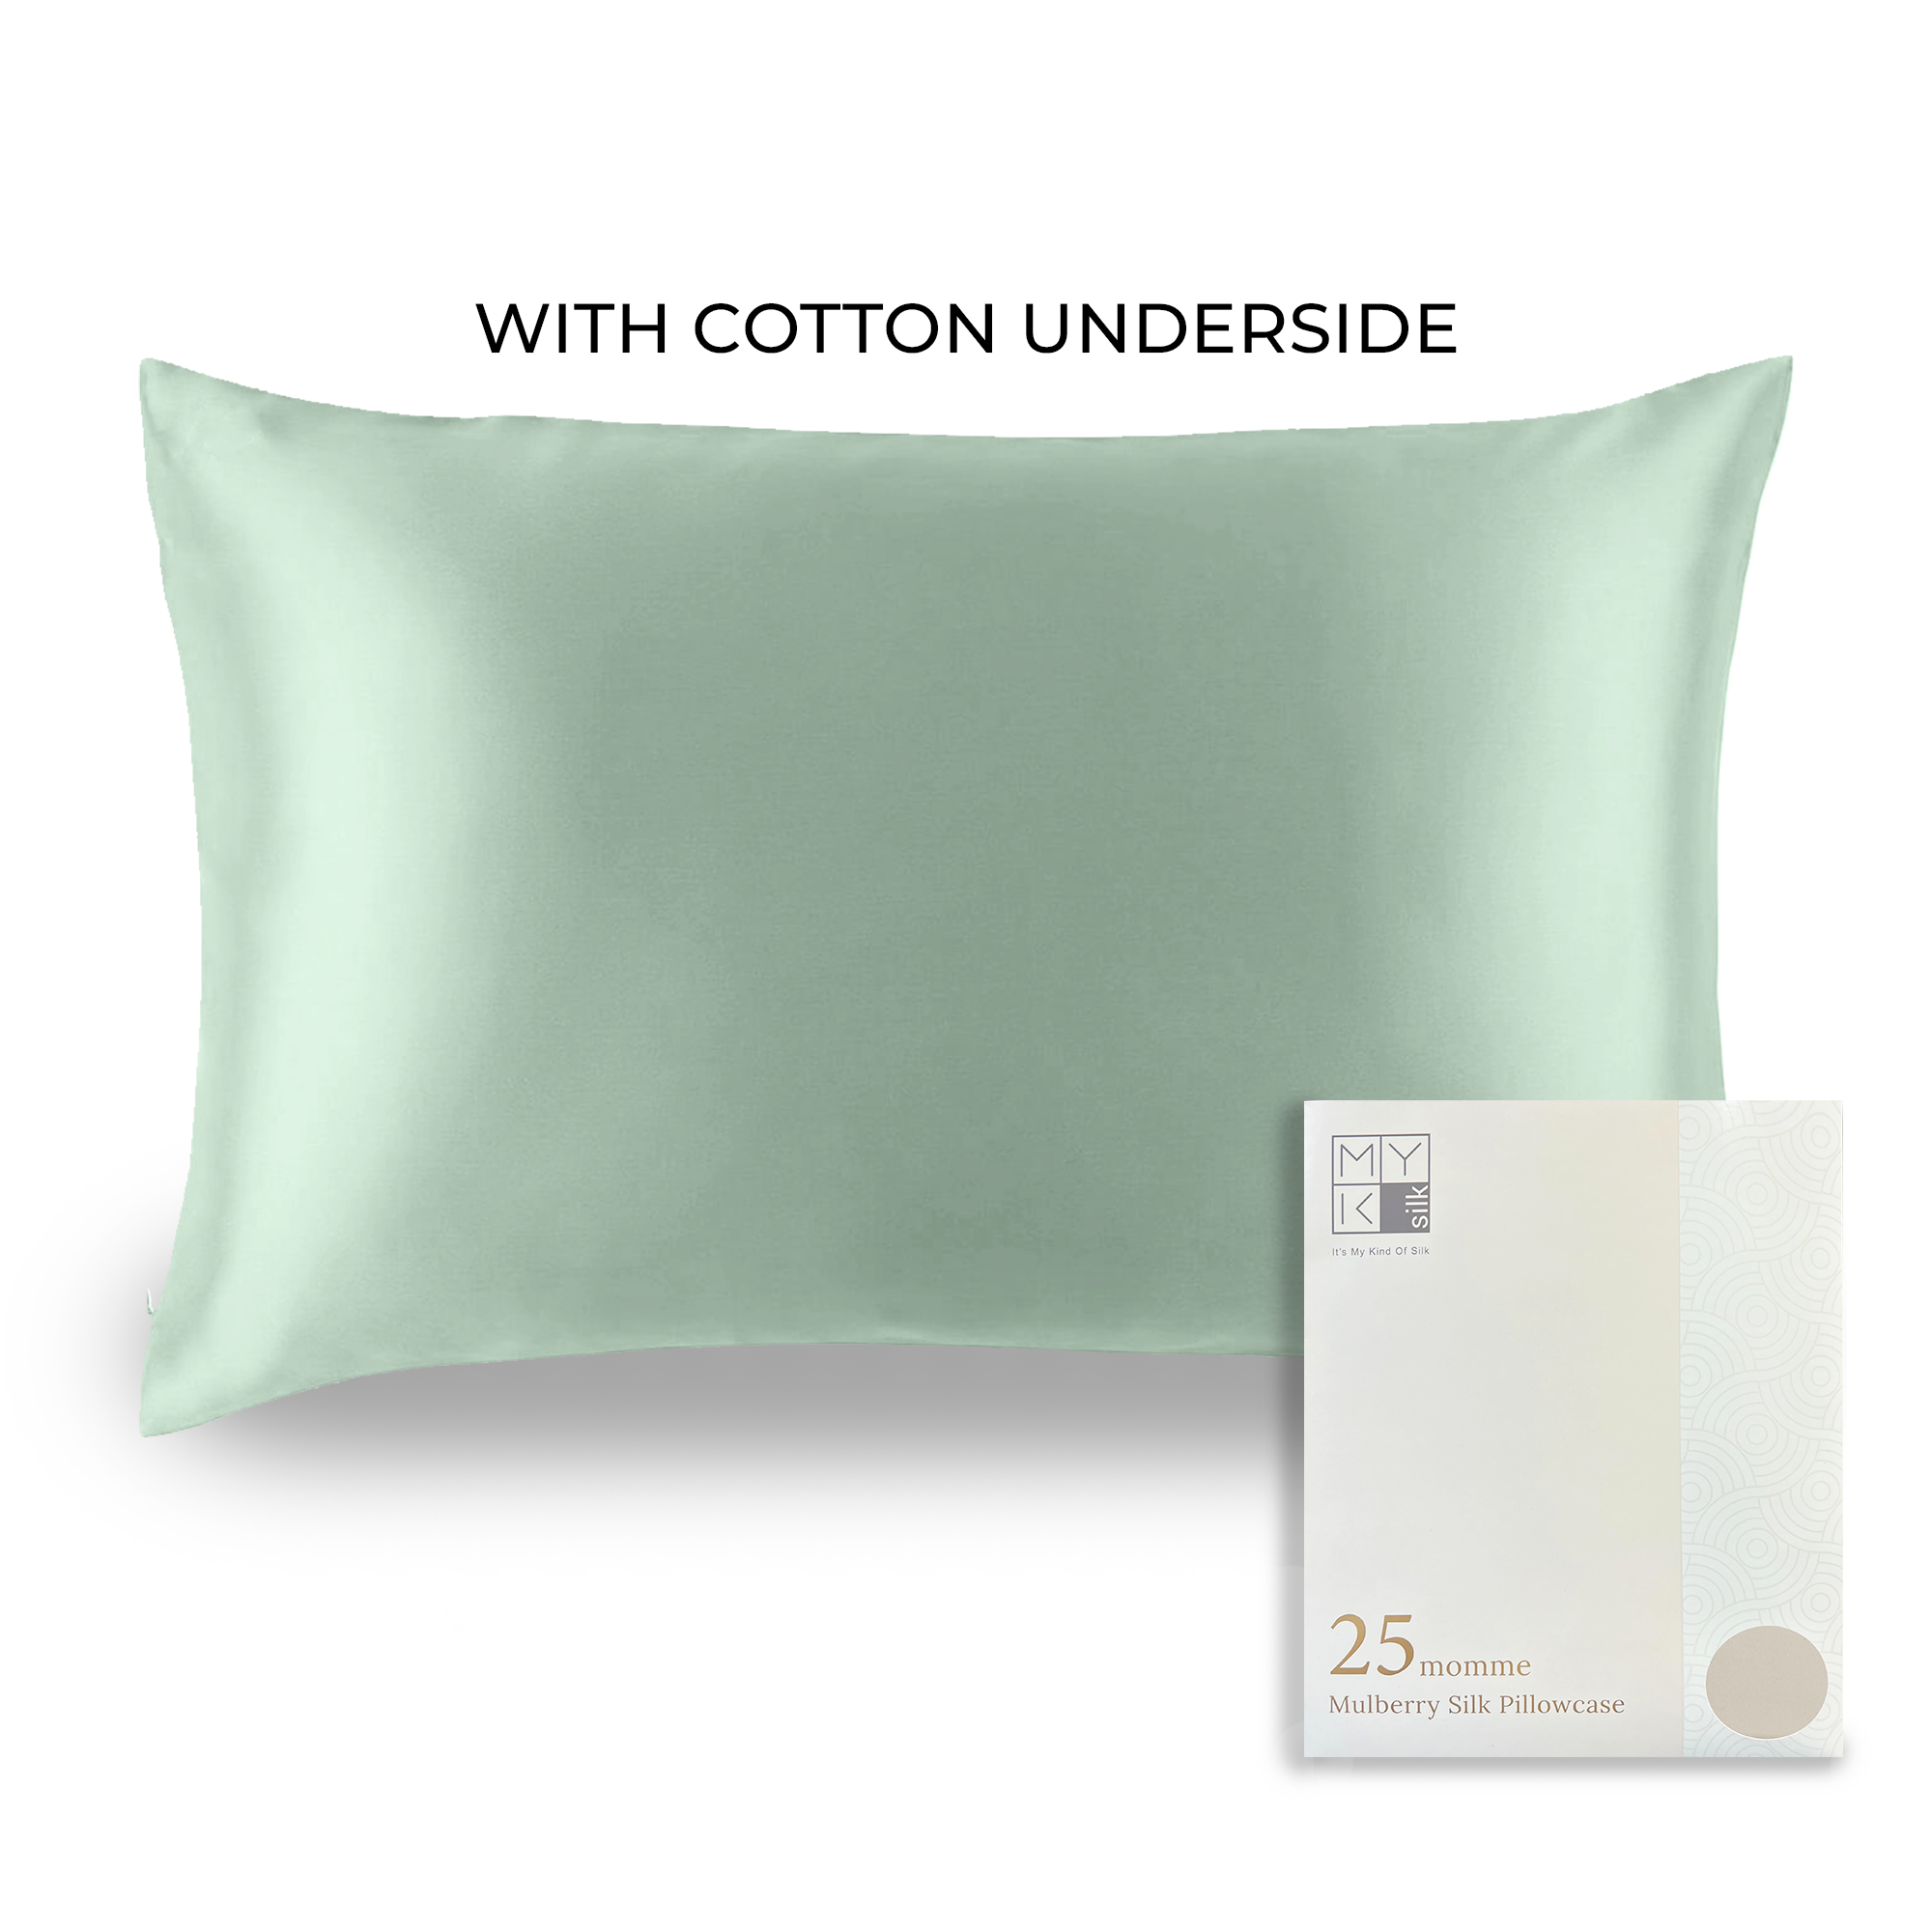 Products Luxury Mulberry Silk Pillowcase with Cotton Underside (25 momme) - MYK Silk #color_green